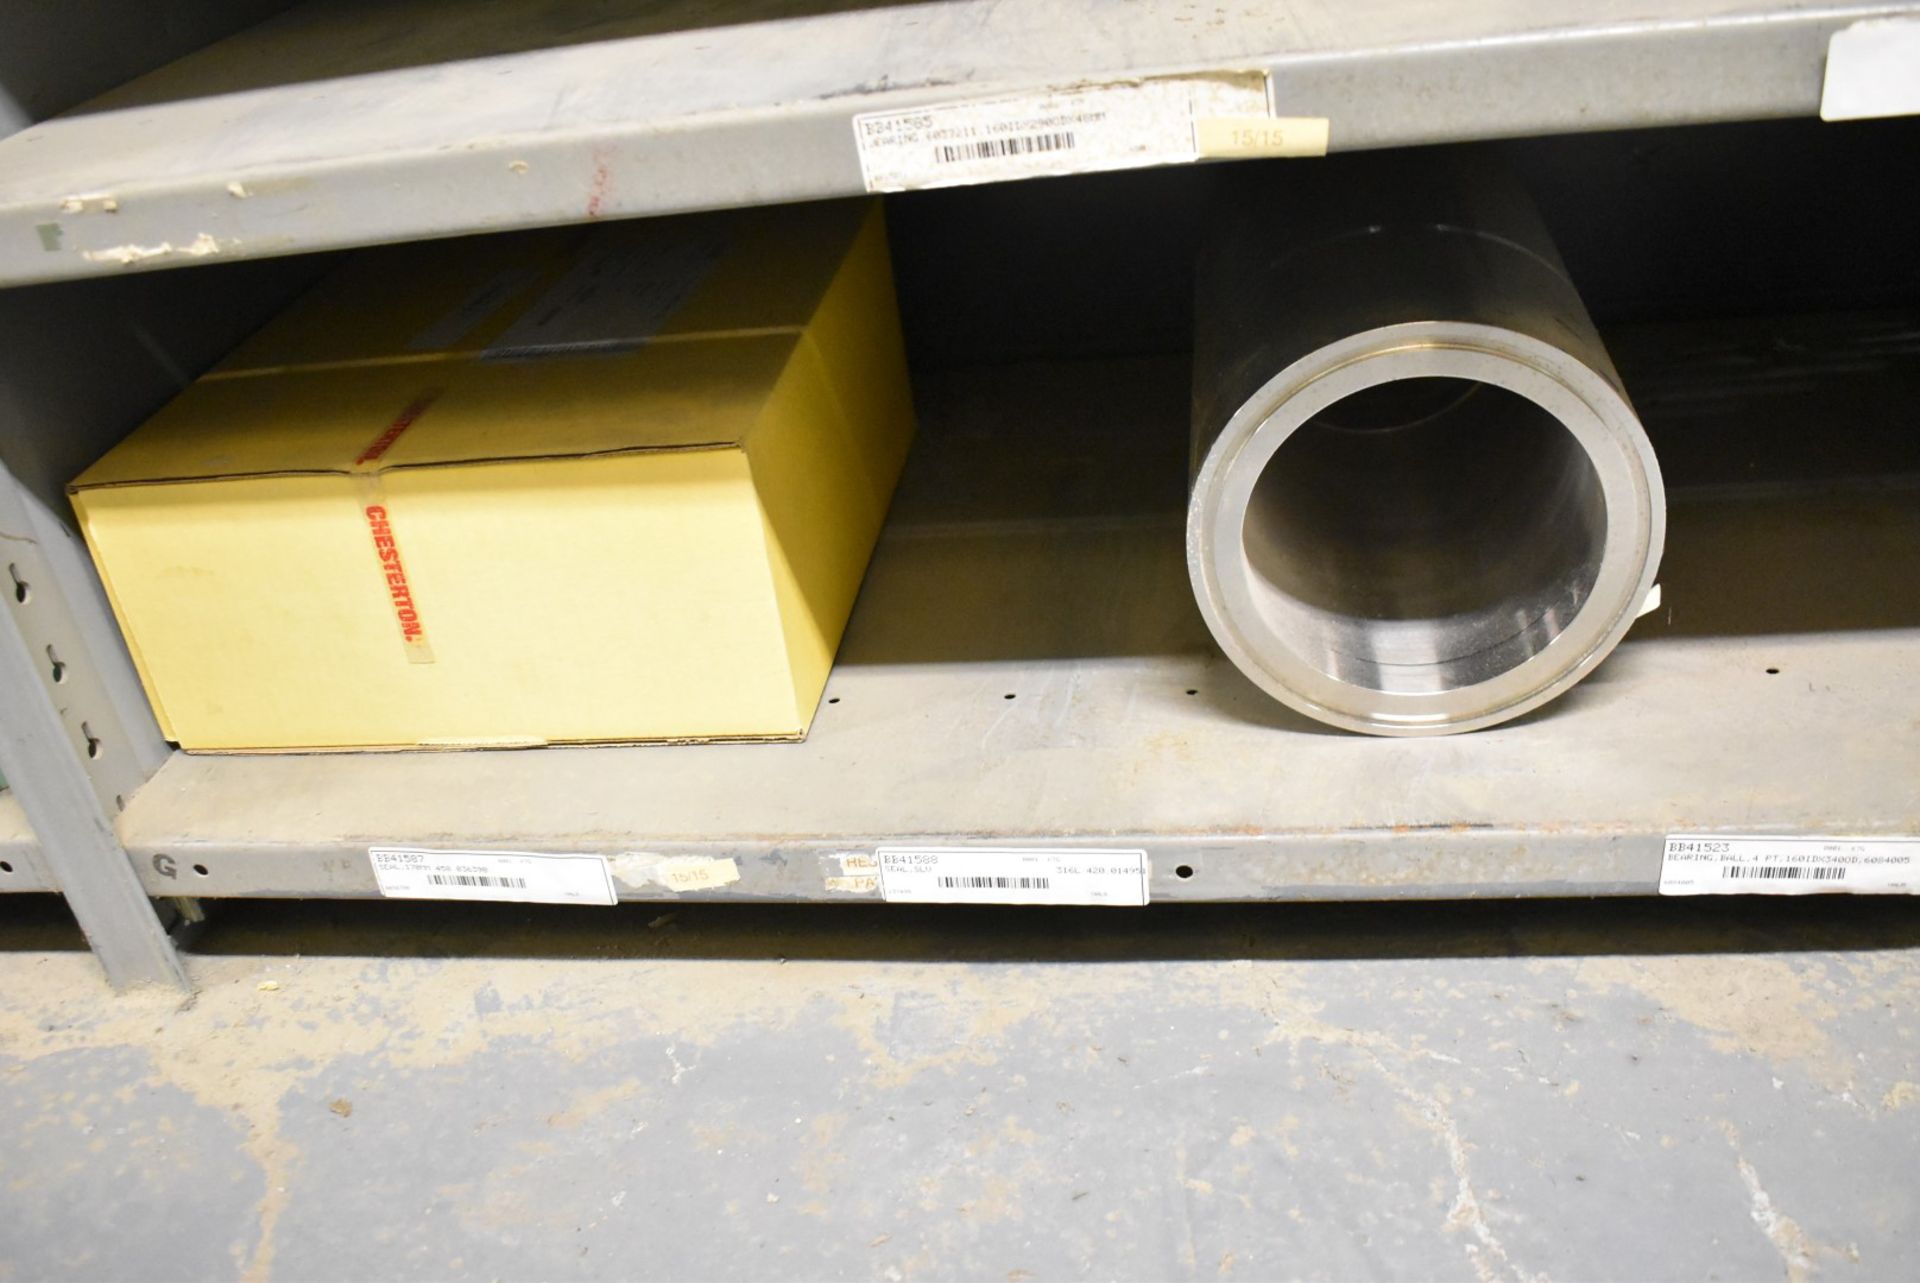 LOT/ CONTENTS OF SHELF - INCLUDING BRAKE BUSHINGS, VOITH PAPER PUMP LINERS, CONVEYOR BELTING, 65X136 - Image 6 of 6